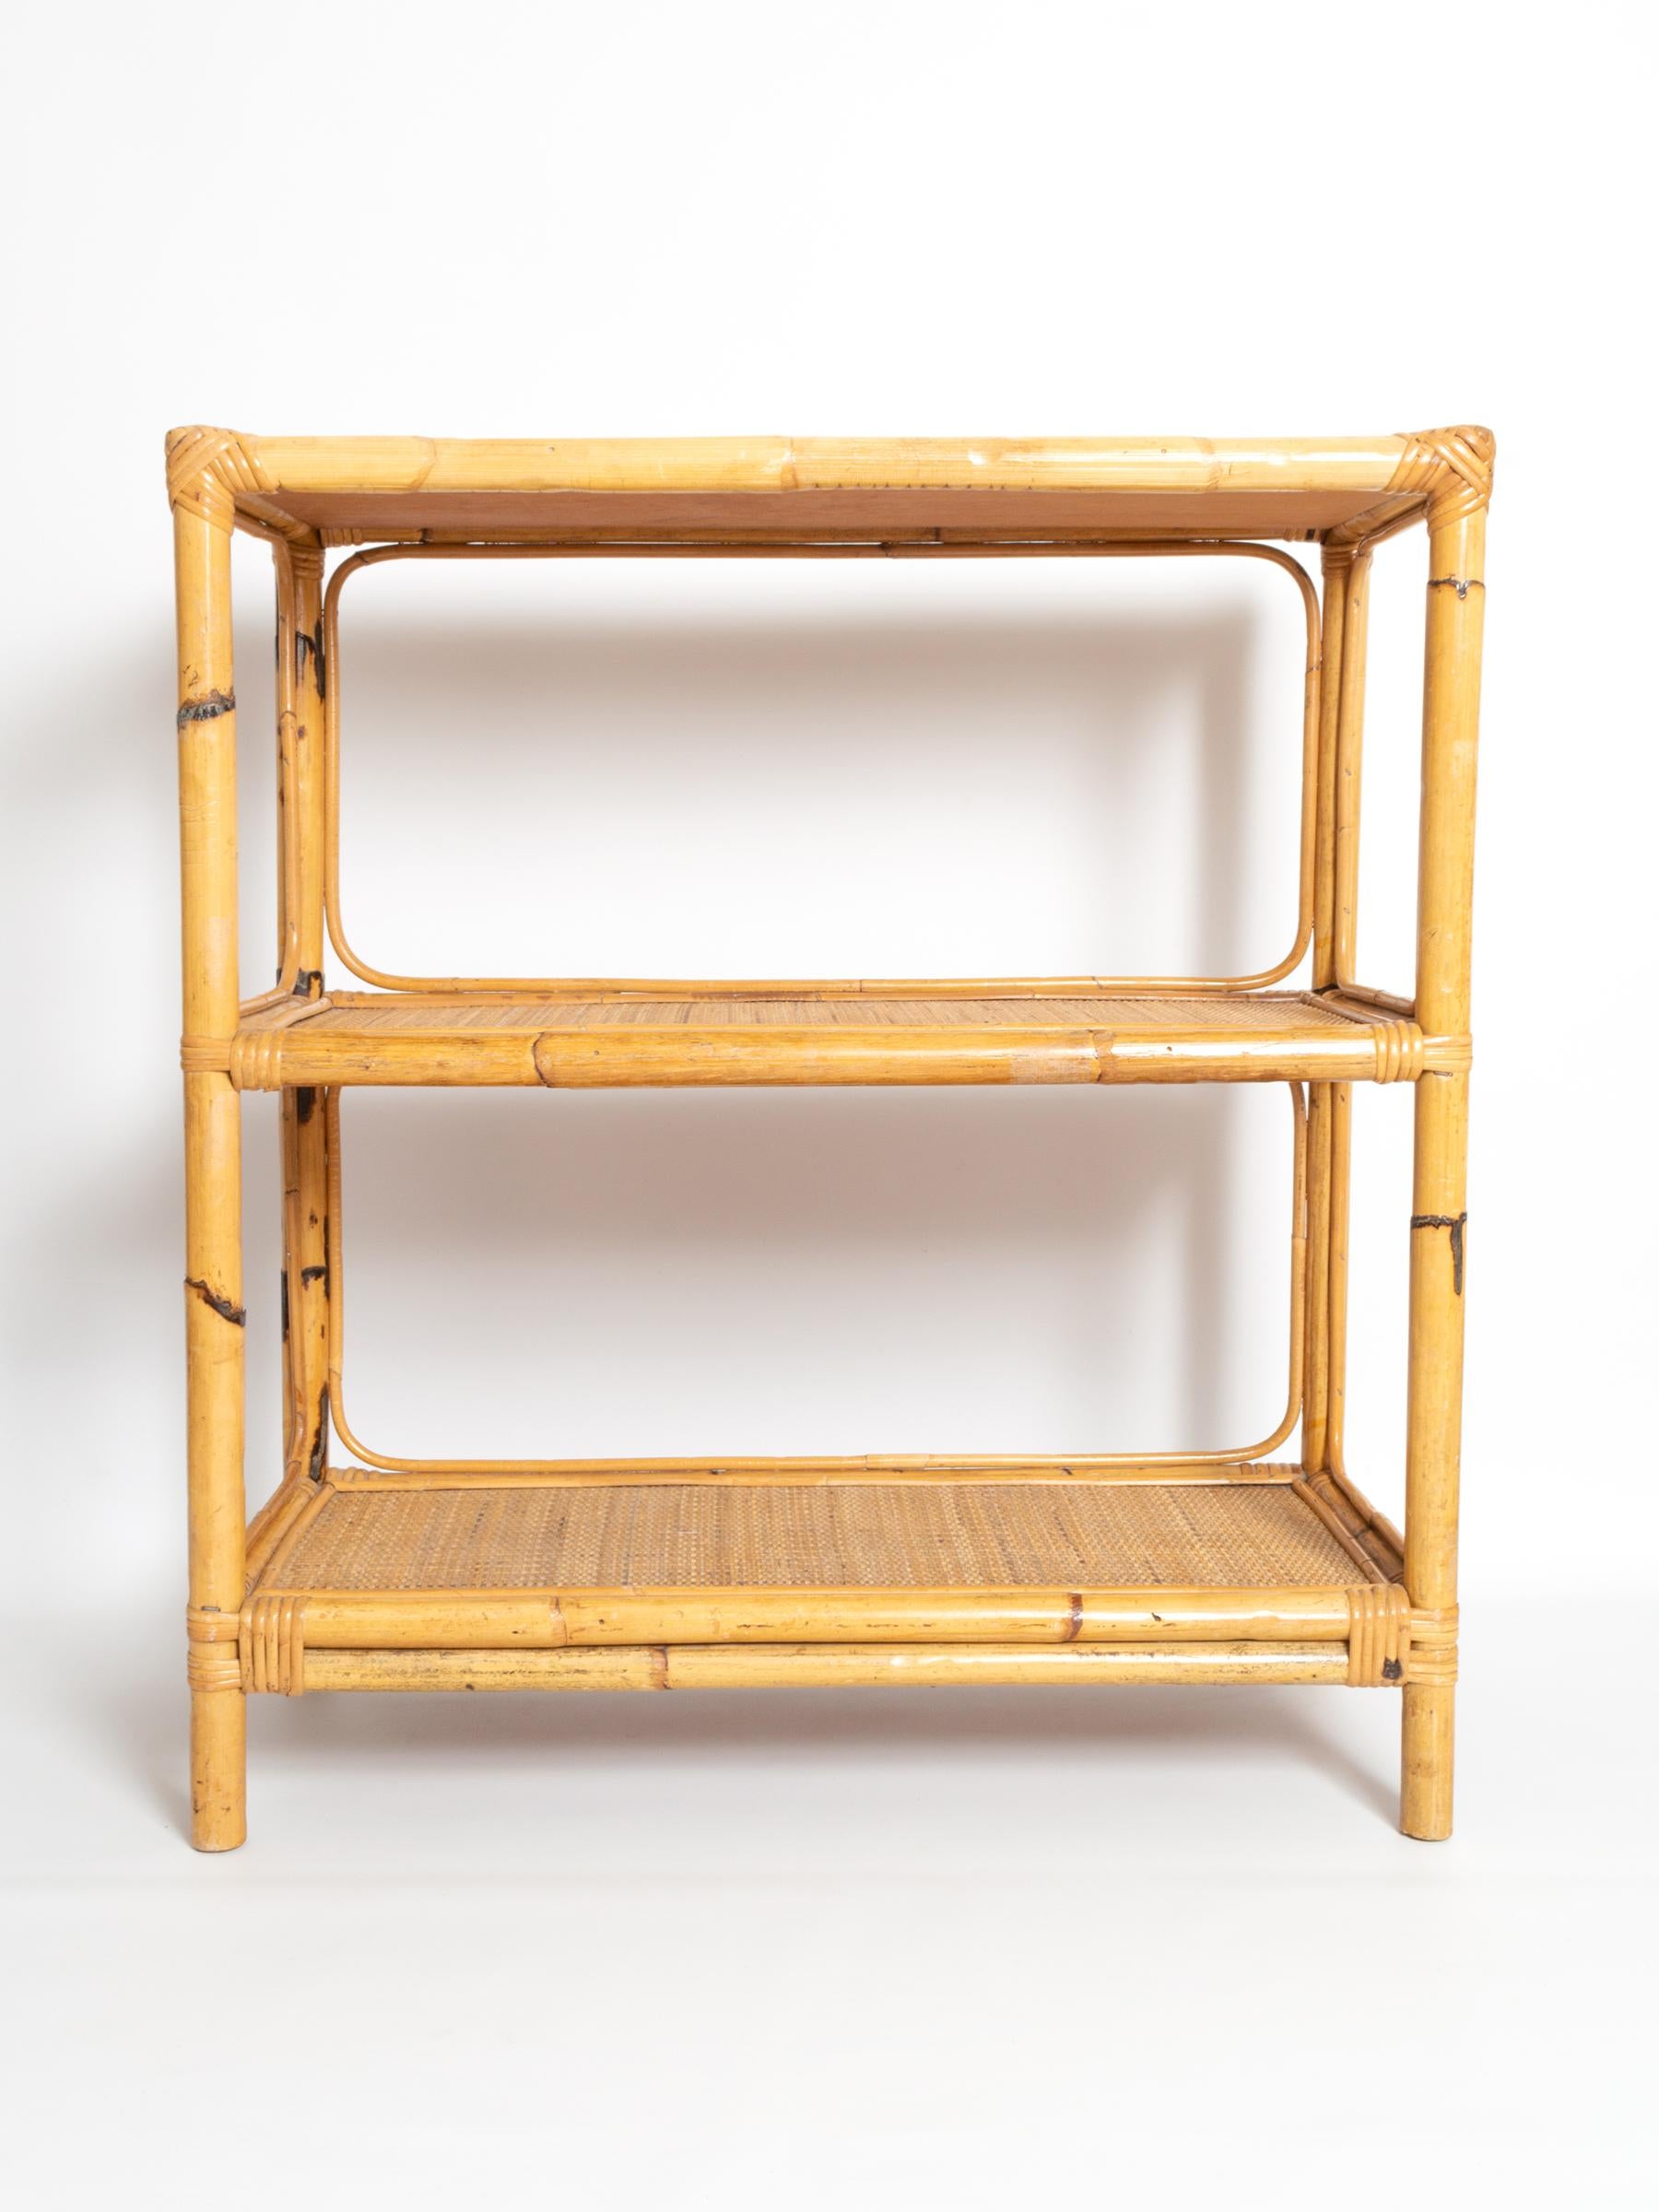 A midcentury bamboo and rattan three-tier Italian étagère (shelves) dating from the 1960s.
In very good vintage condition commensurate of age.